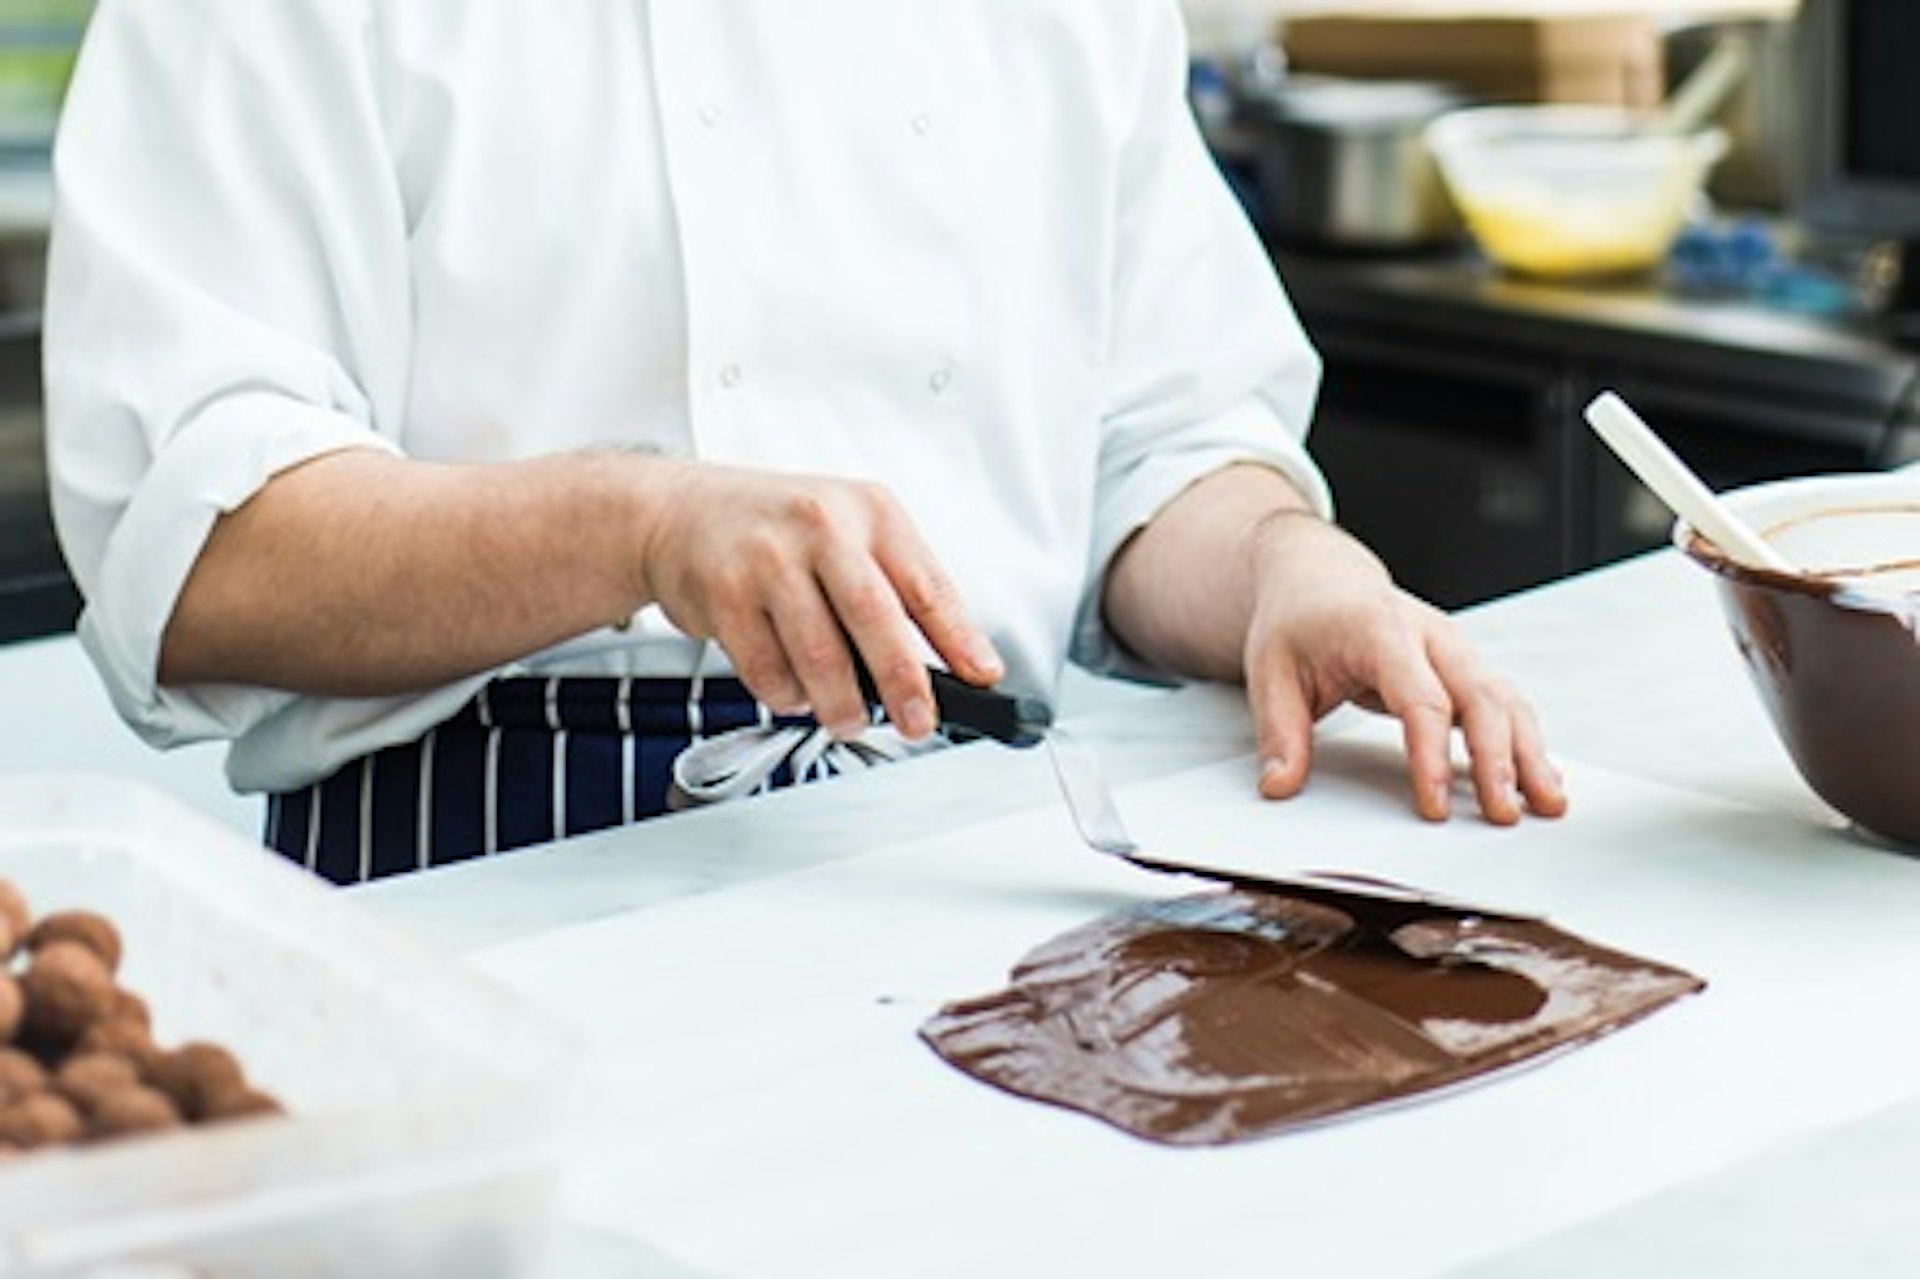 Taste and Make Your Own Amazing Chocolate for Two with Melt Notting Hill, London